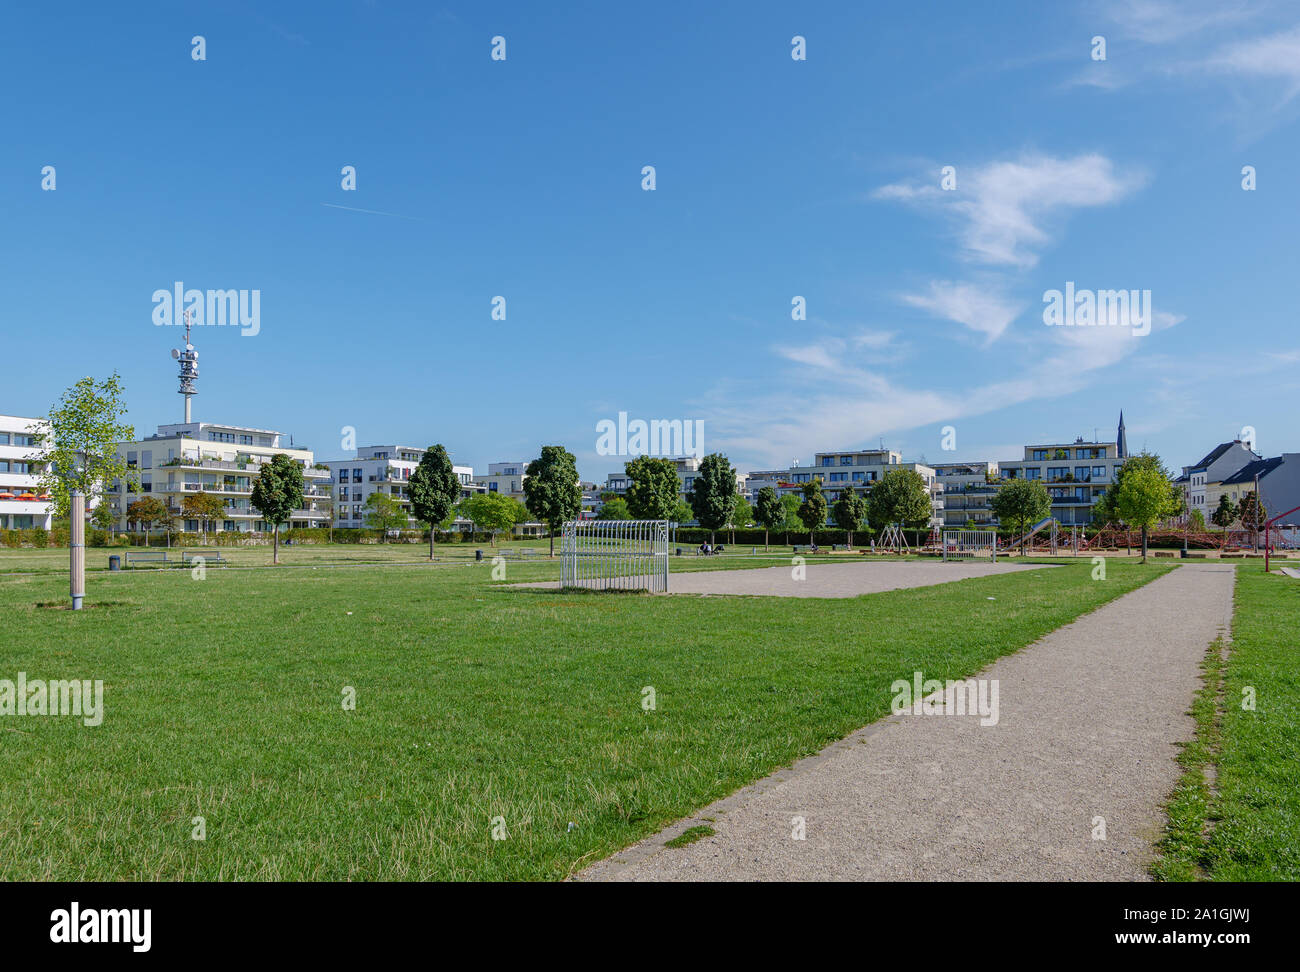 Football, soccer or futsal court field  at Bürgerpark Kalk, public park surrounded with housing and residence. Stock Photo